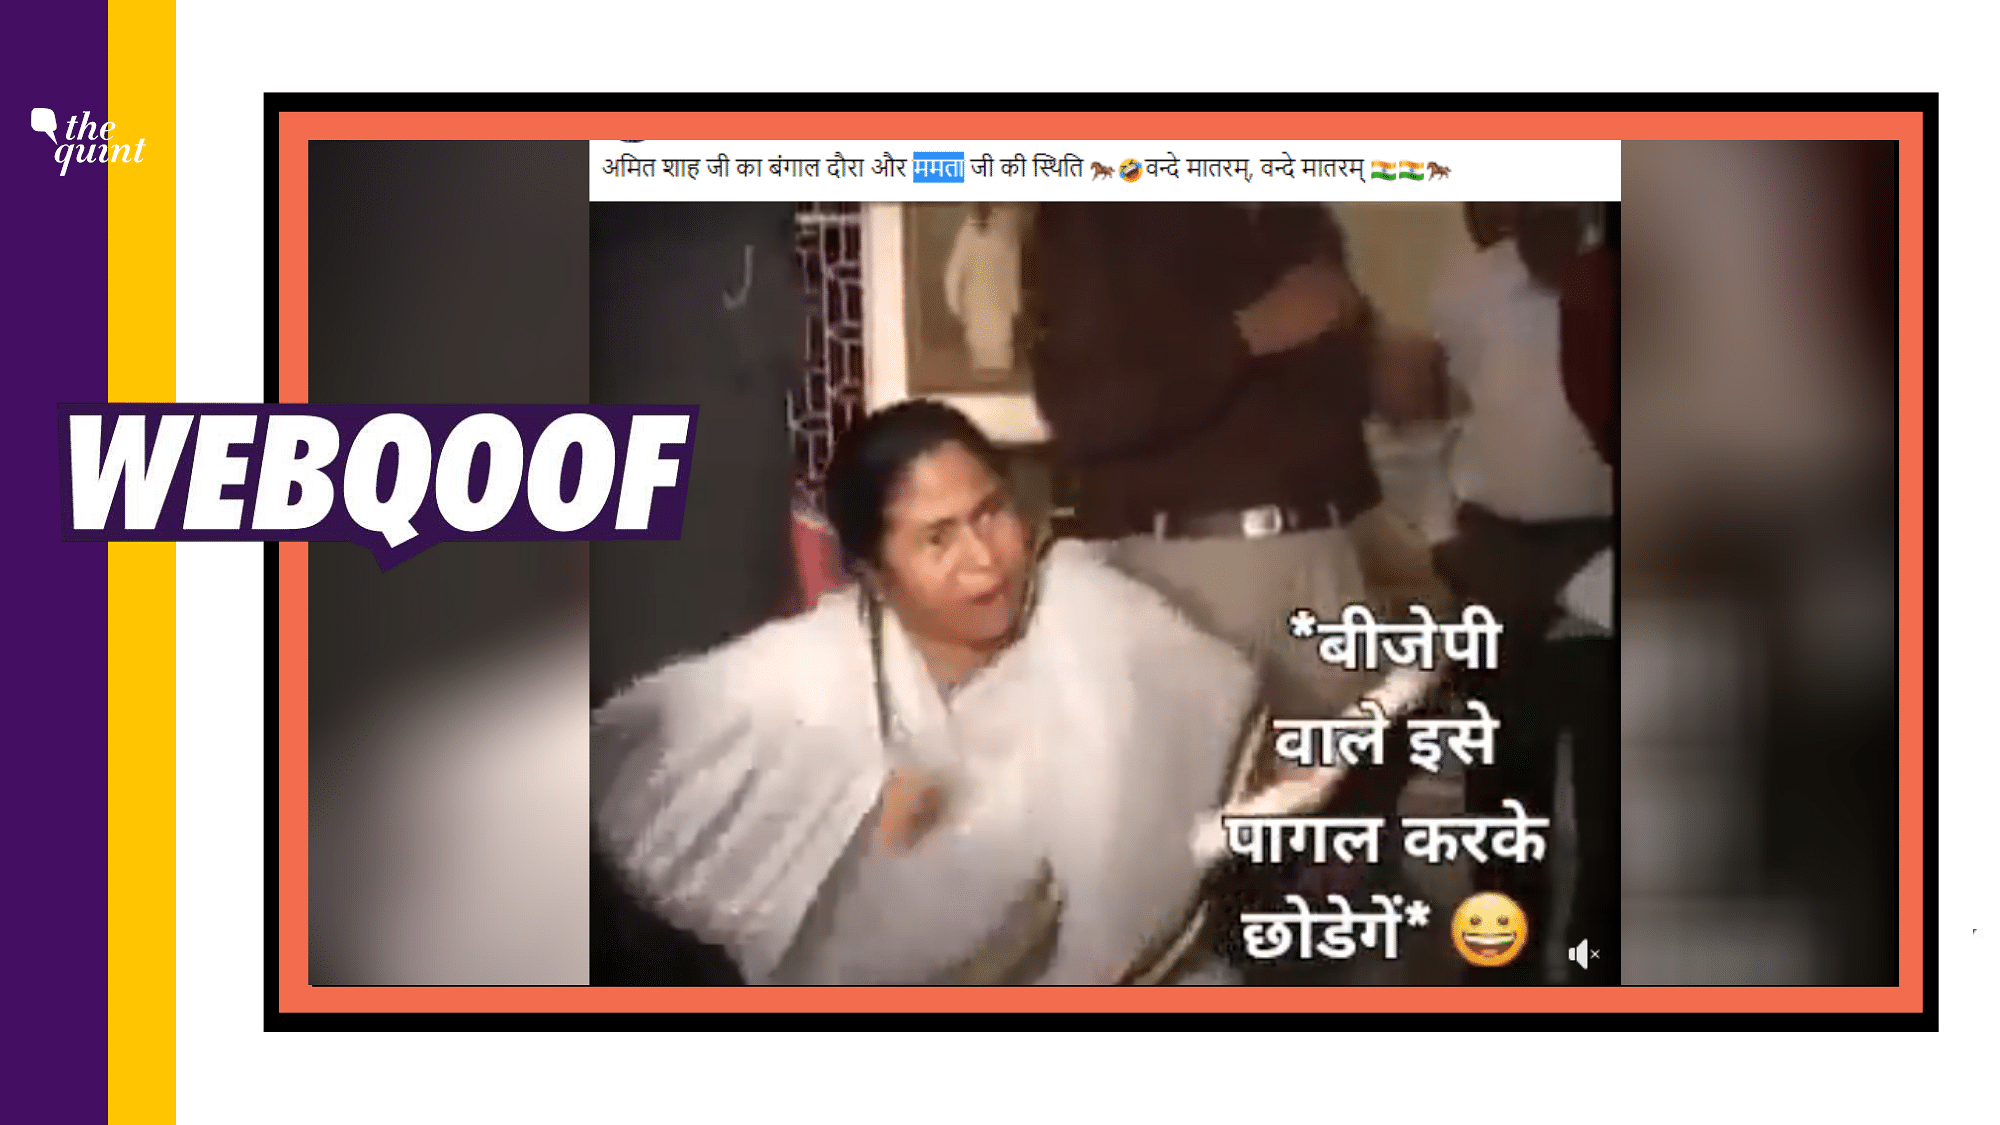 The video is from November 2006, when Banerjee along with other MLAs had ransacked the West Bengal Assembly.